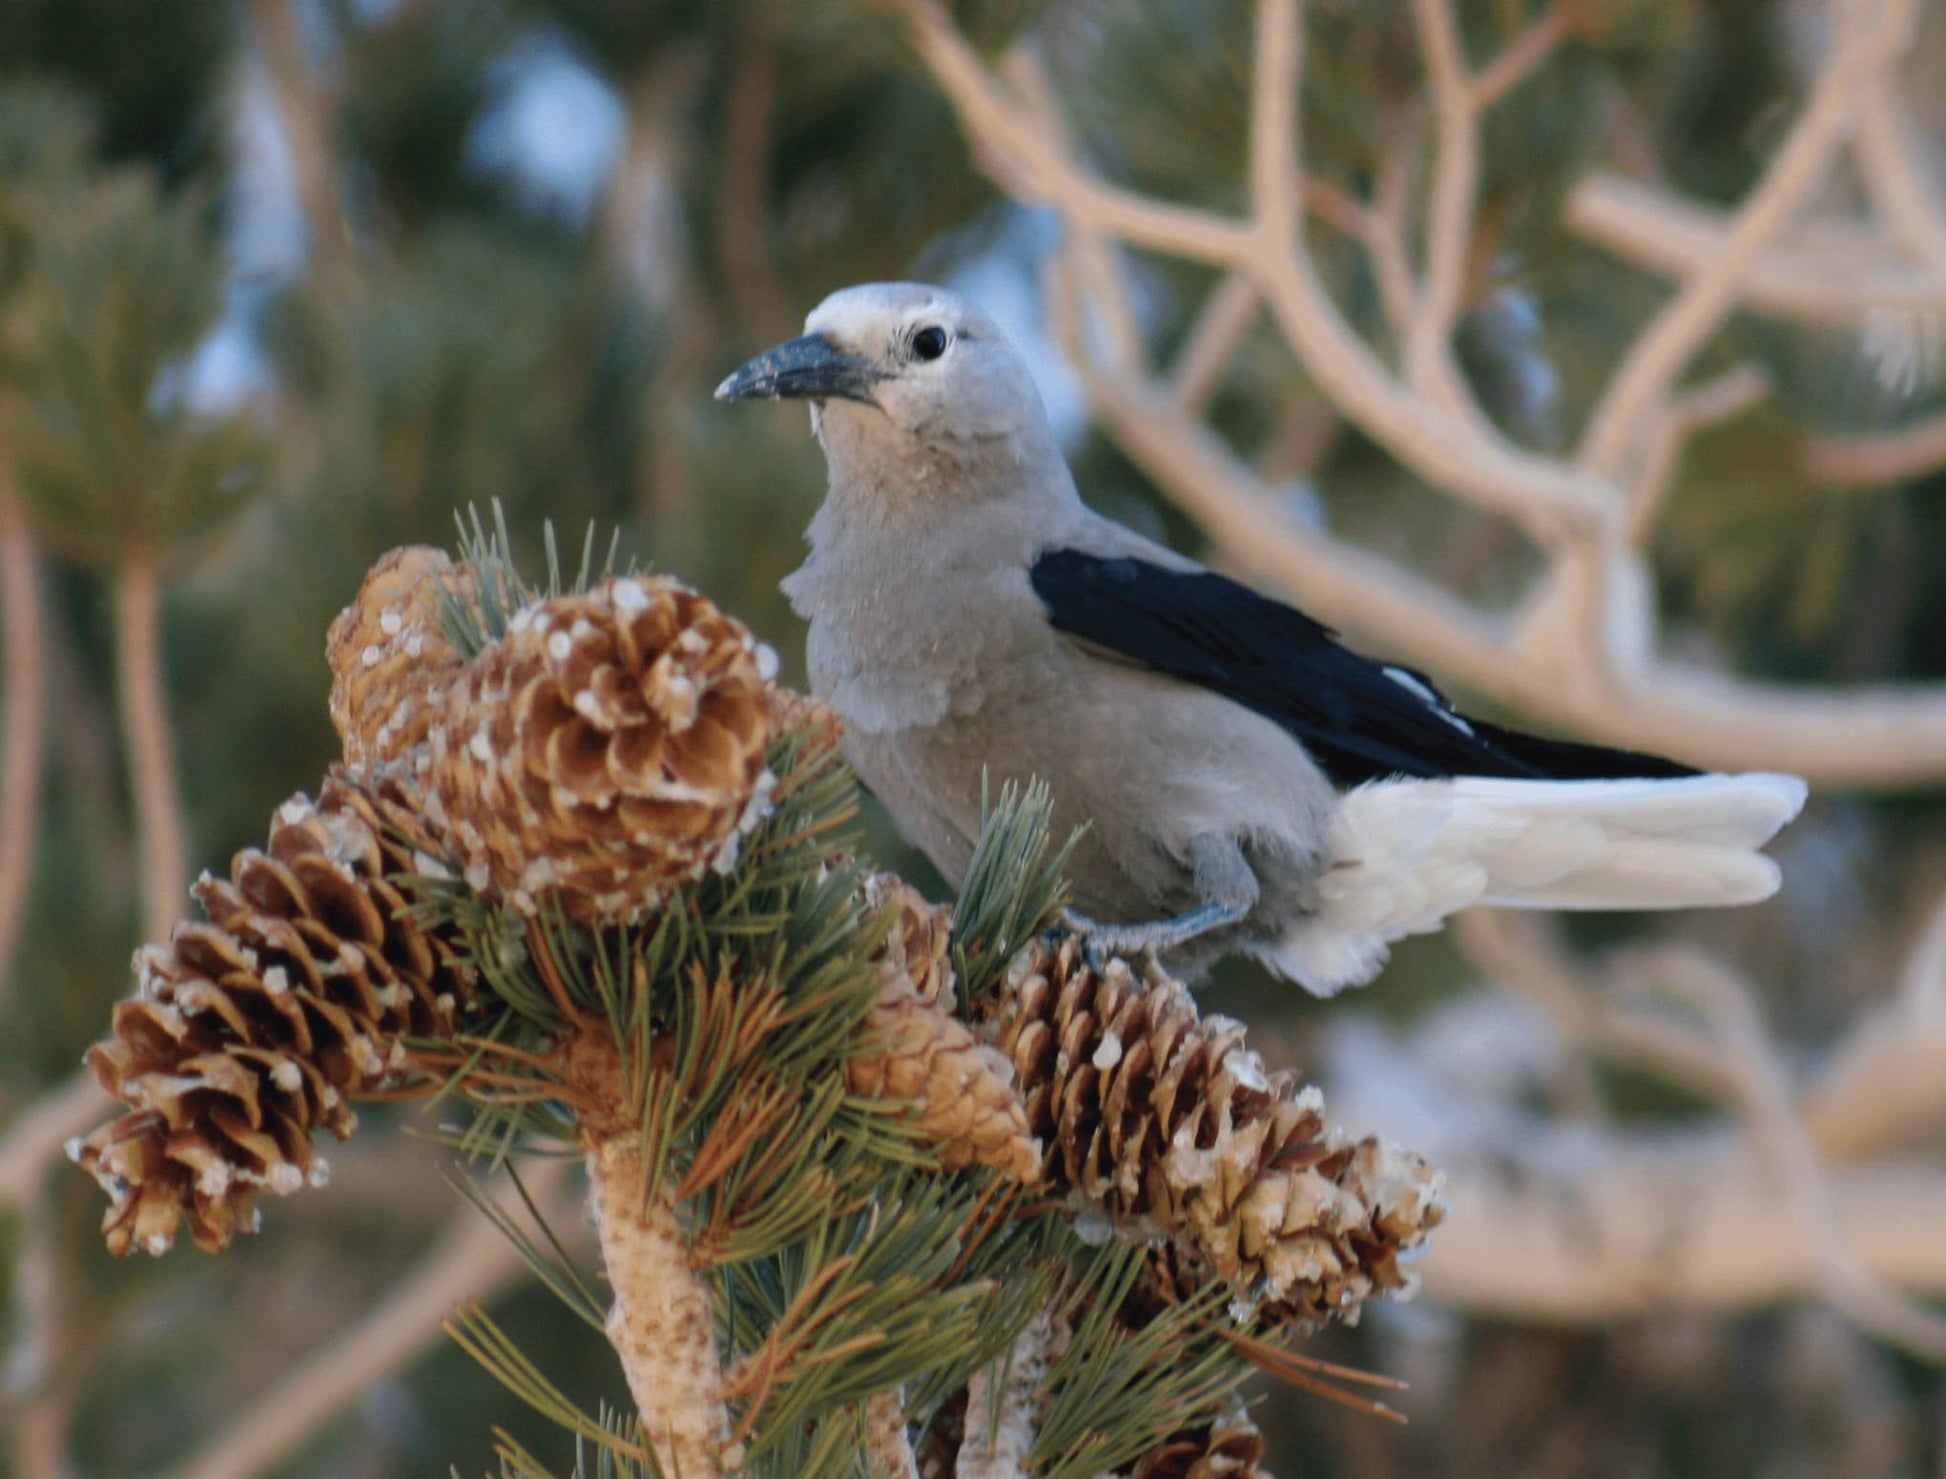 A photo titled "Clark's Nutcracker" features a Clark's Nutcracker bird perched on a branch of a bristlecone pine tree in the White Mountains of California. The bird's distinctive black and white plumage contrasts with the reddish bark of the pine. 